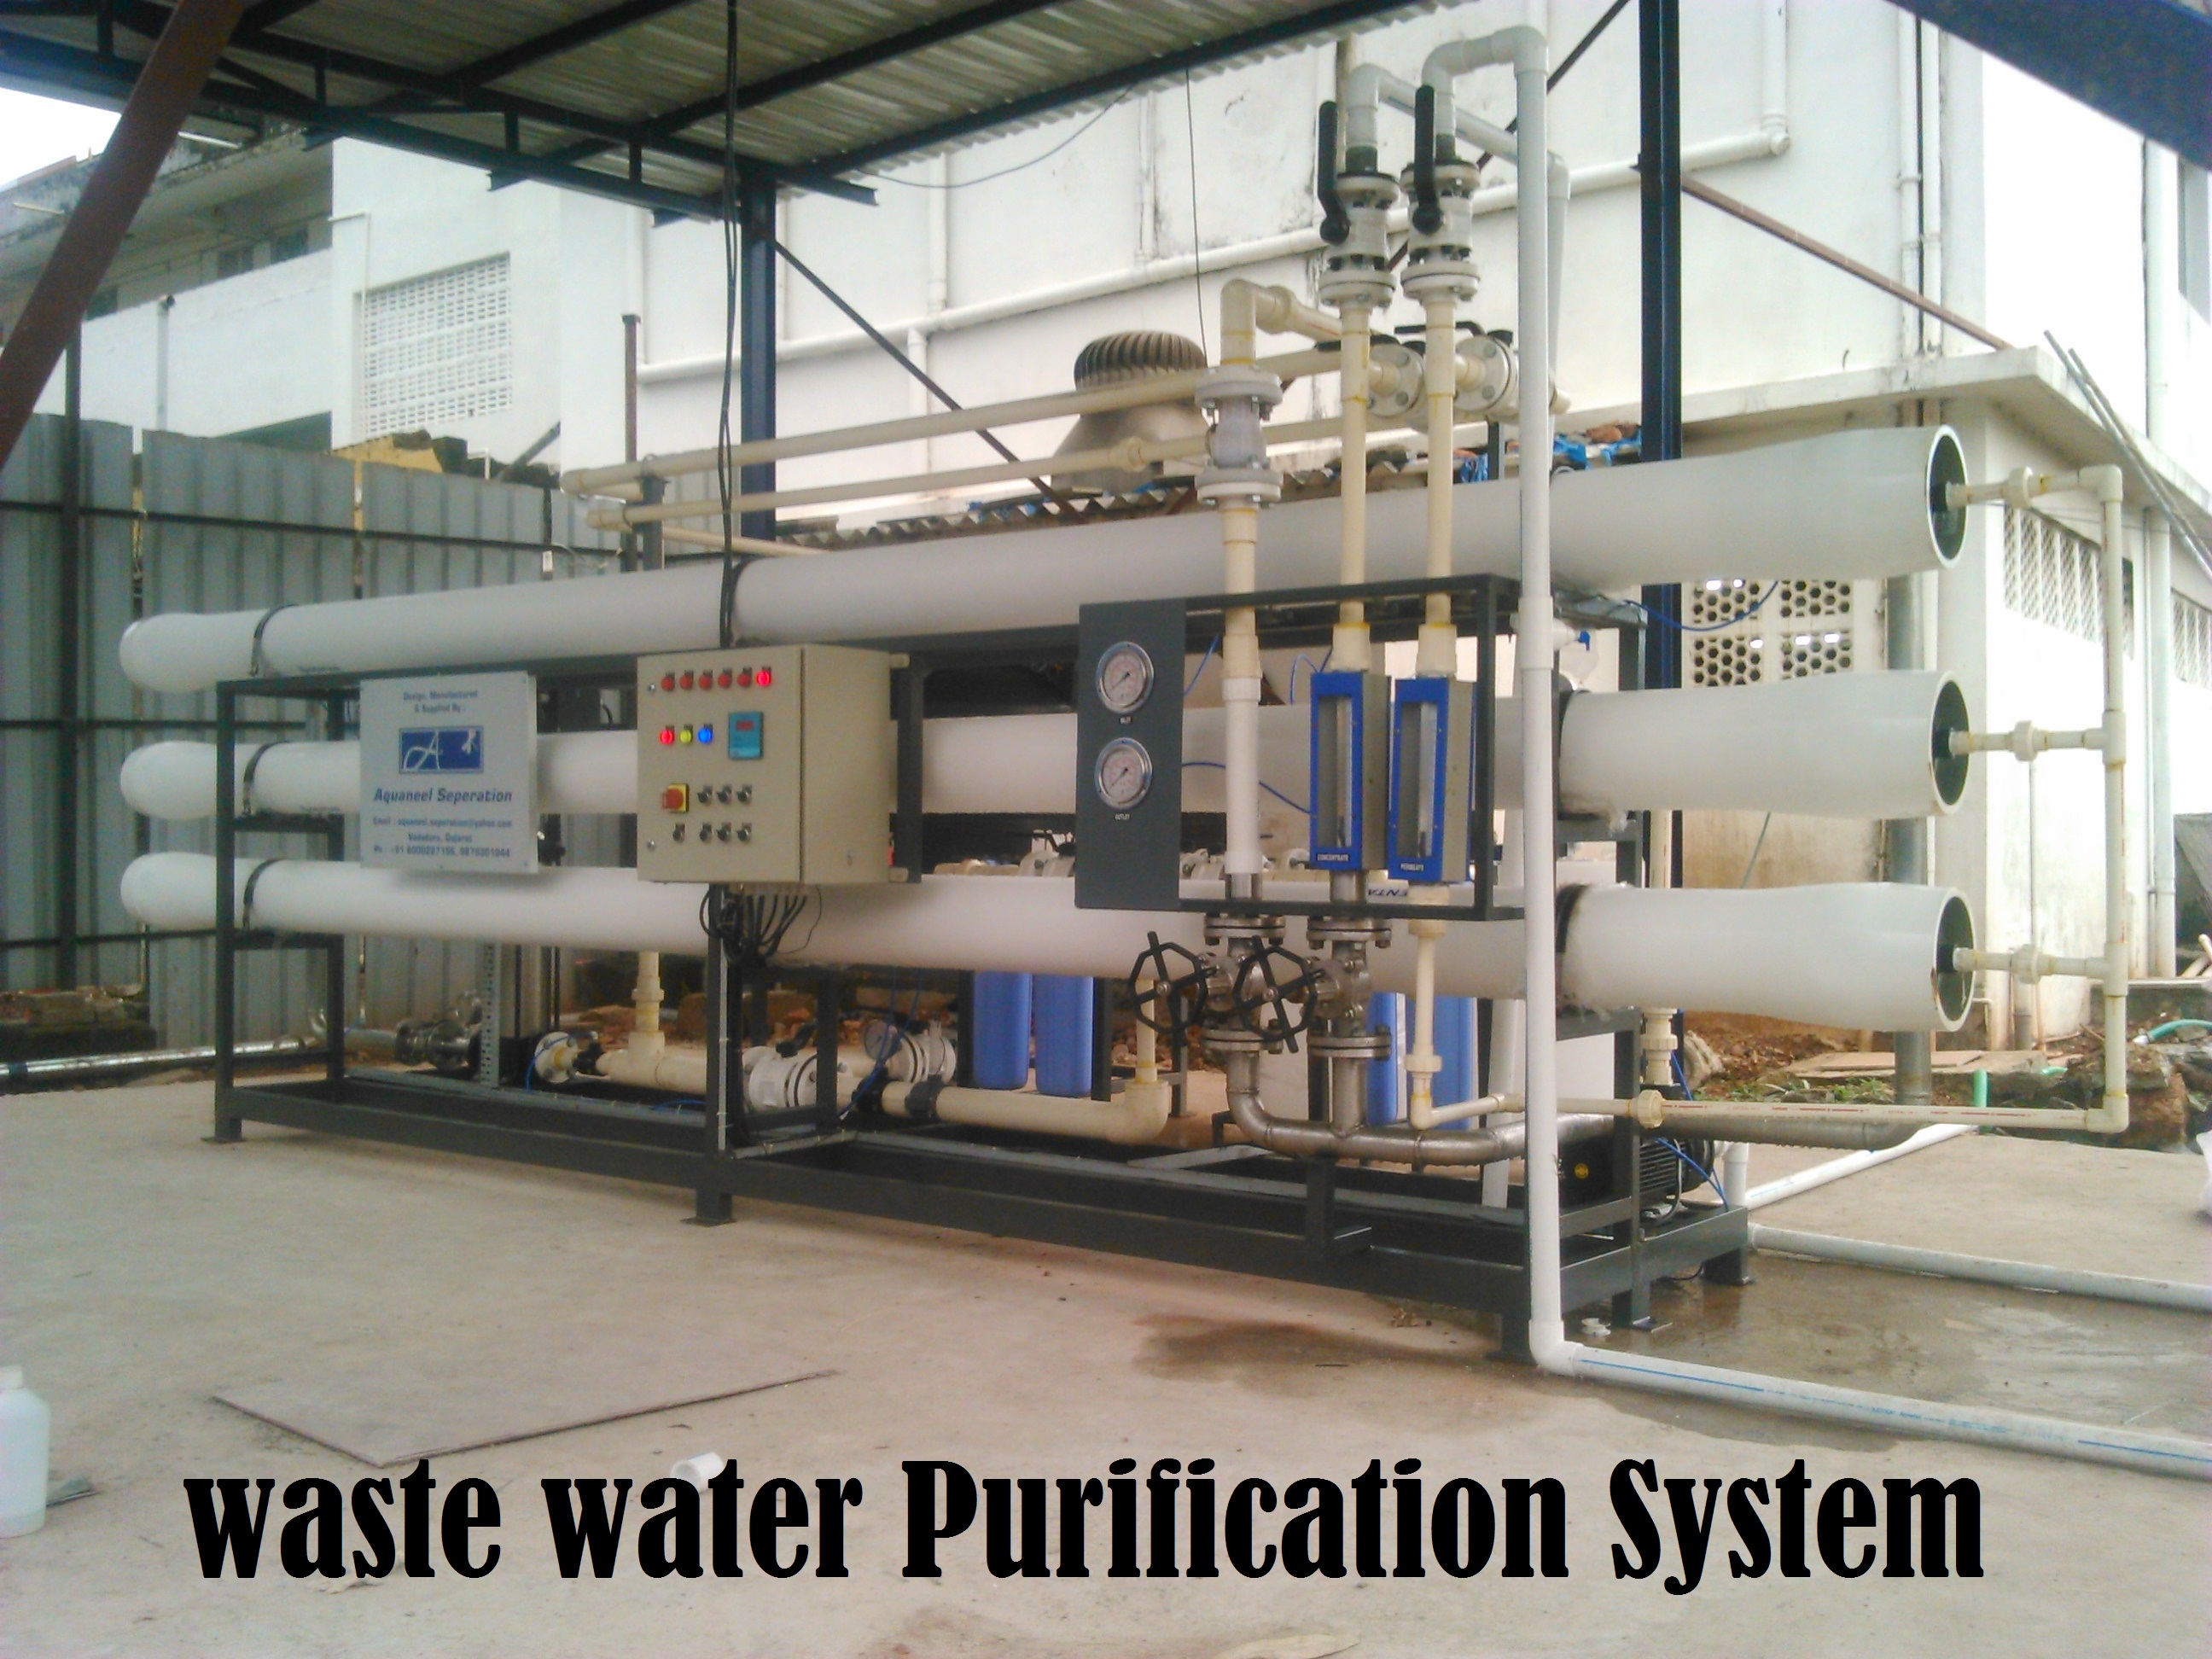 System for Waste Water Purification, Supplied by Aquaneel Seperation